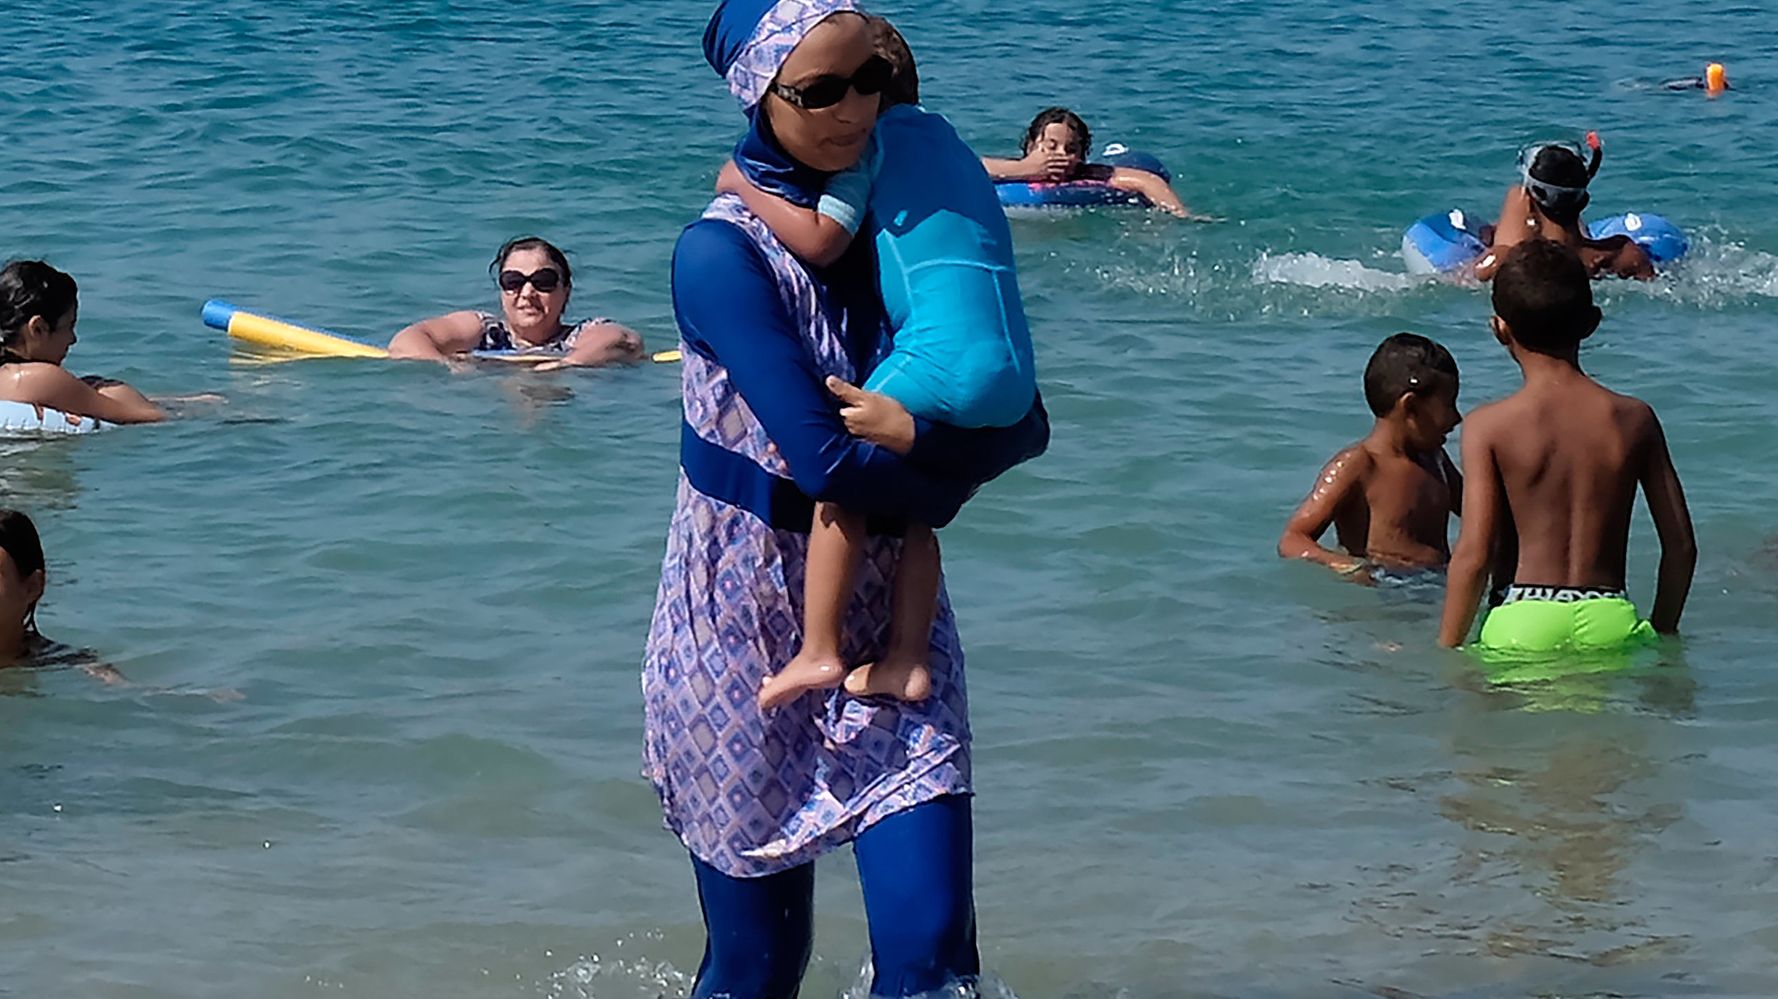 Nudist Beach Arab - The Naked Provocation Of Swimming While Muslim | HuffPost Religion